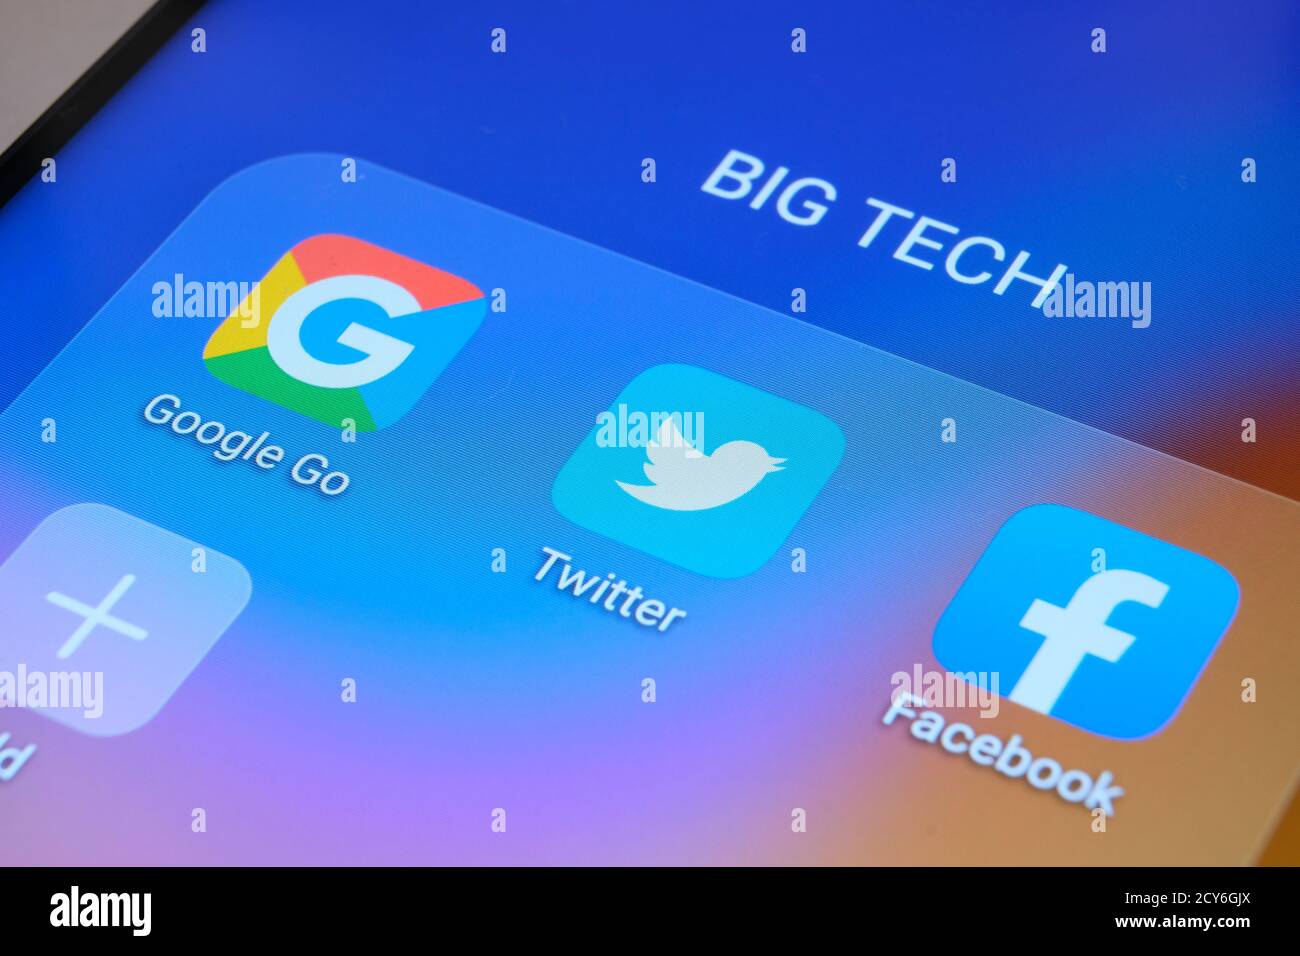 Google, Facebook, Twitter apps seen on the screen of smartphone. Stock Photo